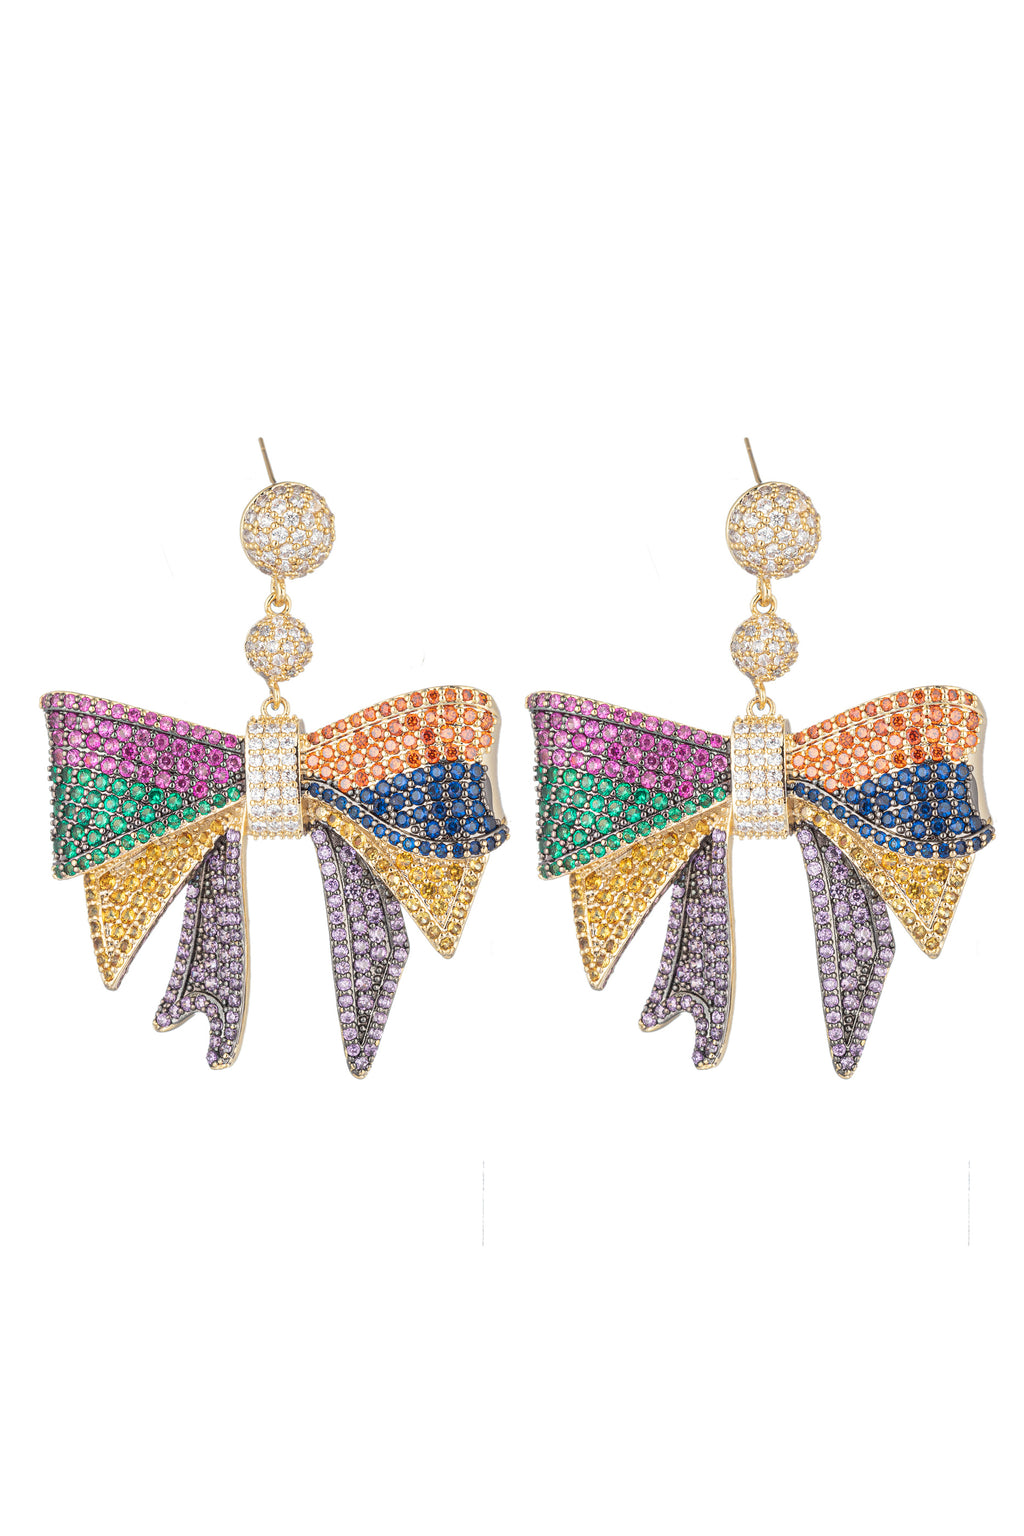 Gold tone brass bow earrings studded with rainbow CZ crystals.